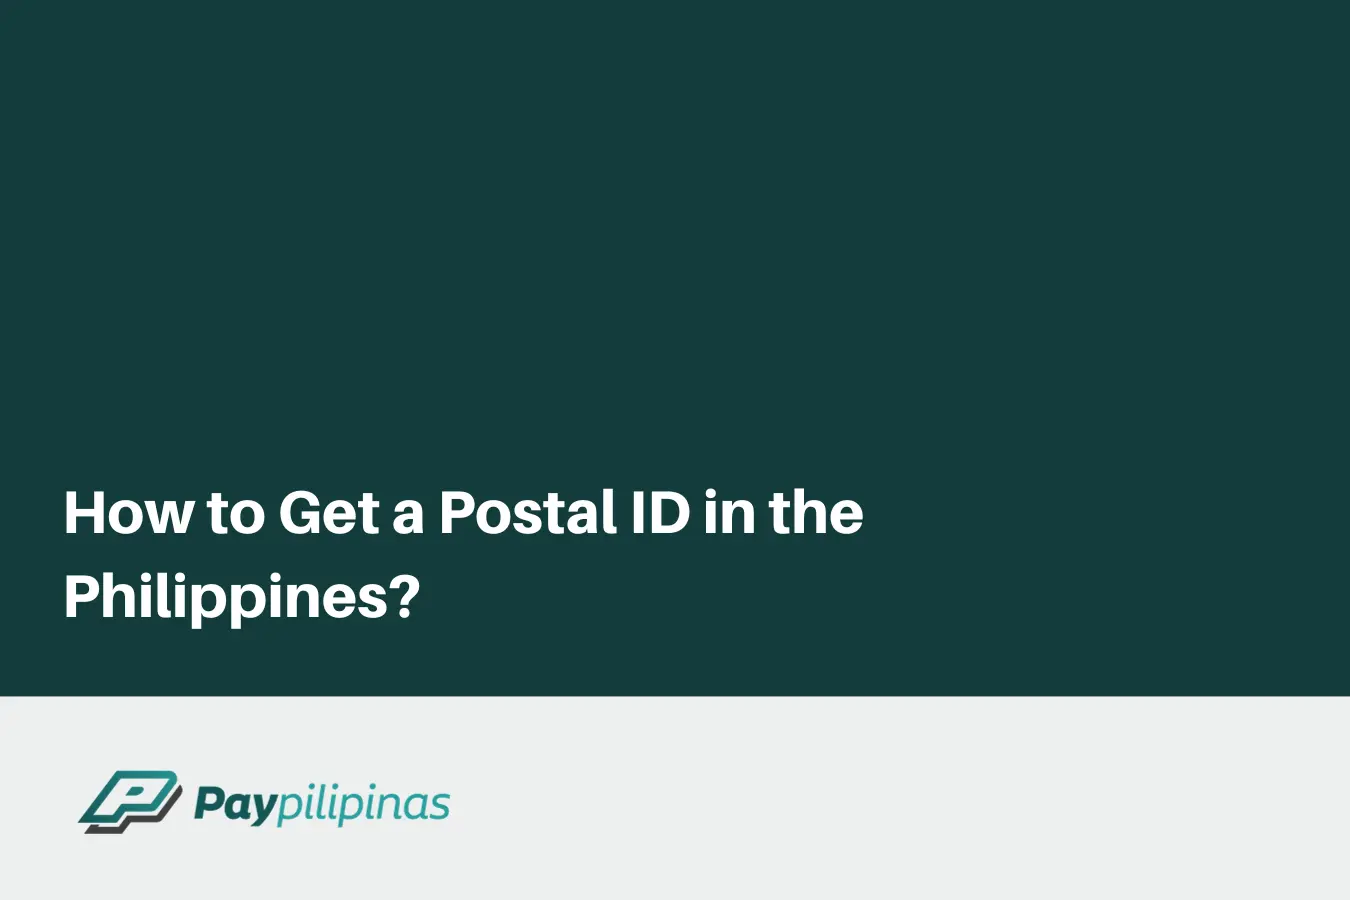 How to Get a Postal ID in the Philippines